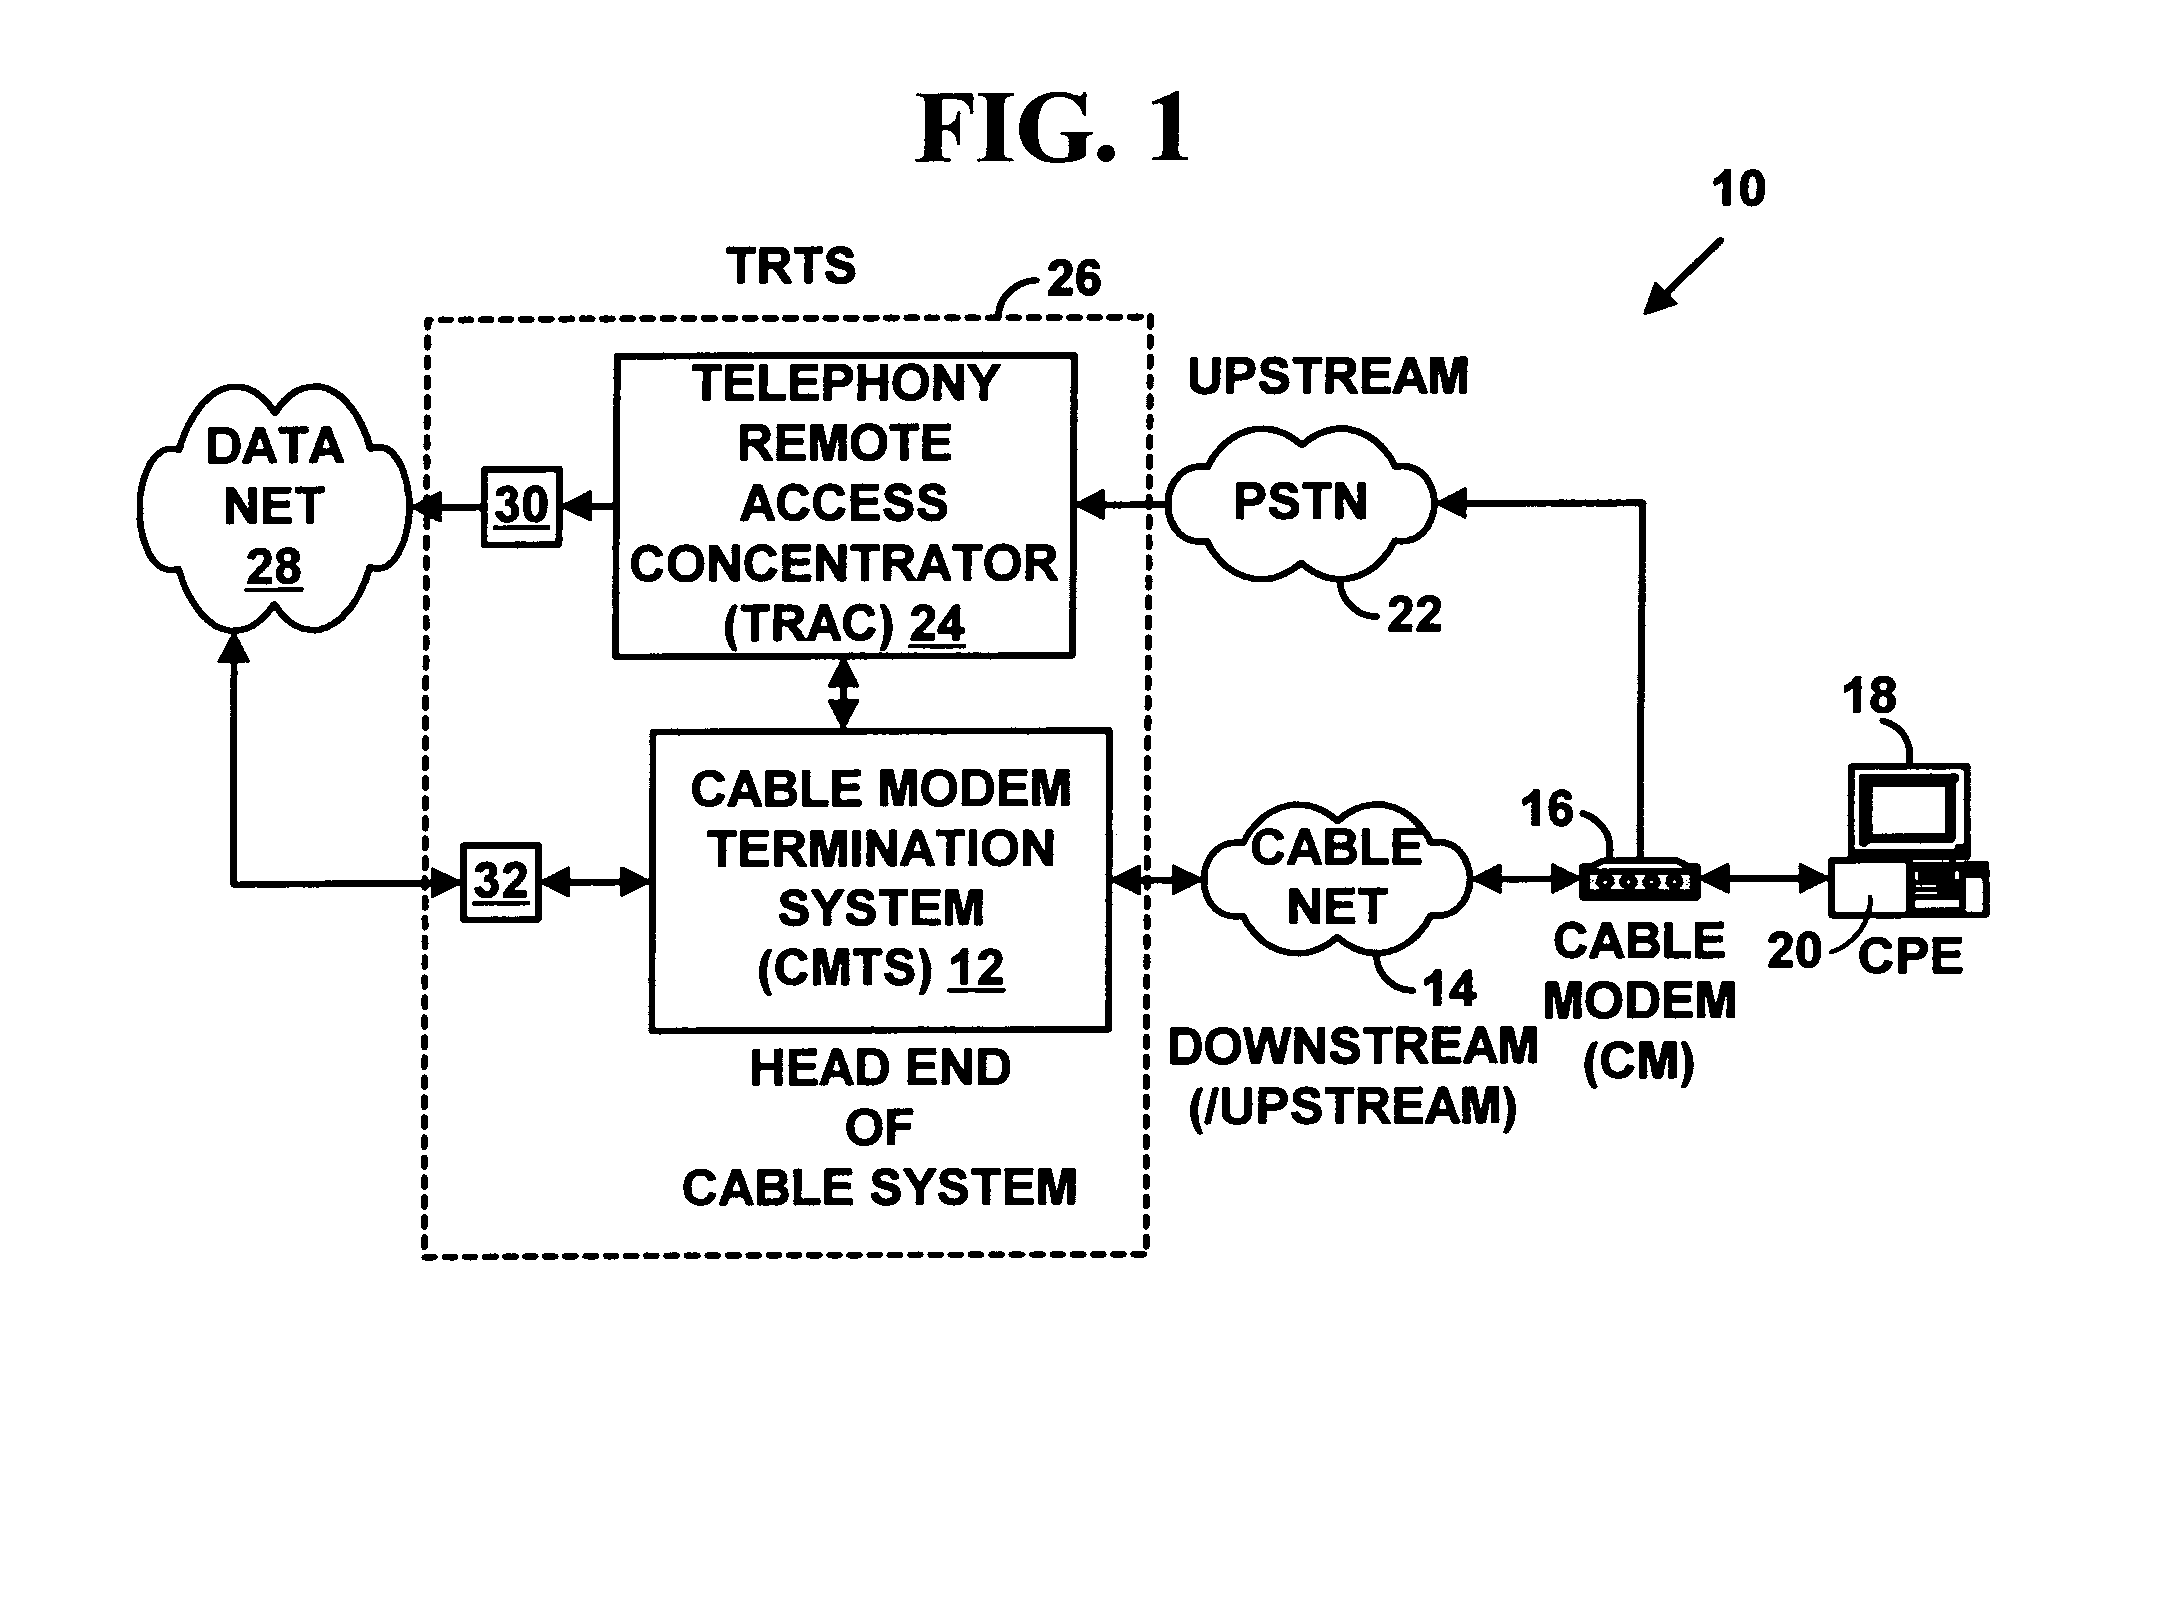 Method and system for dynamic service registration in a data-over-cable system